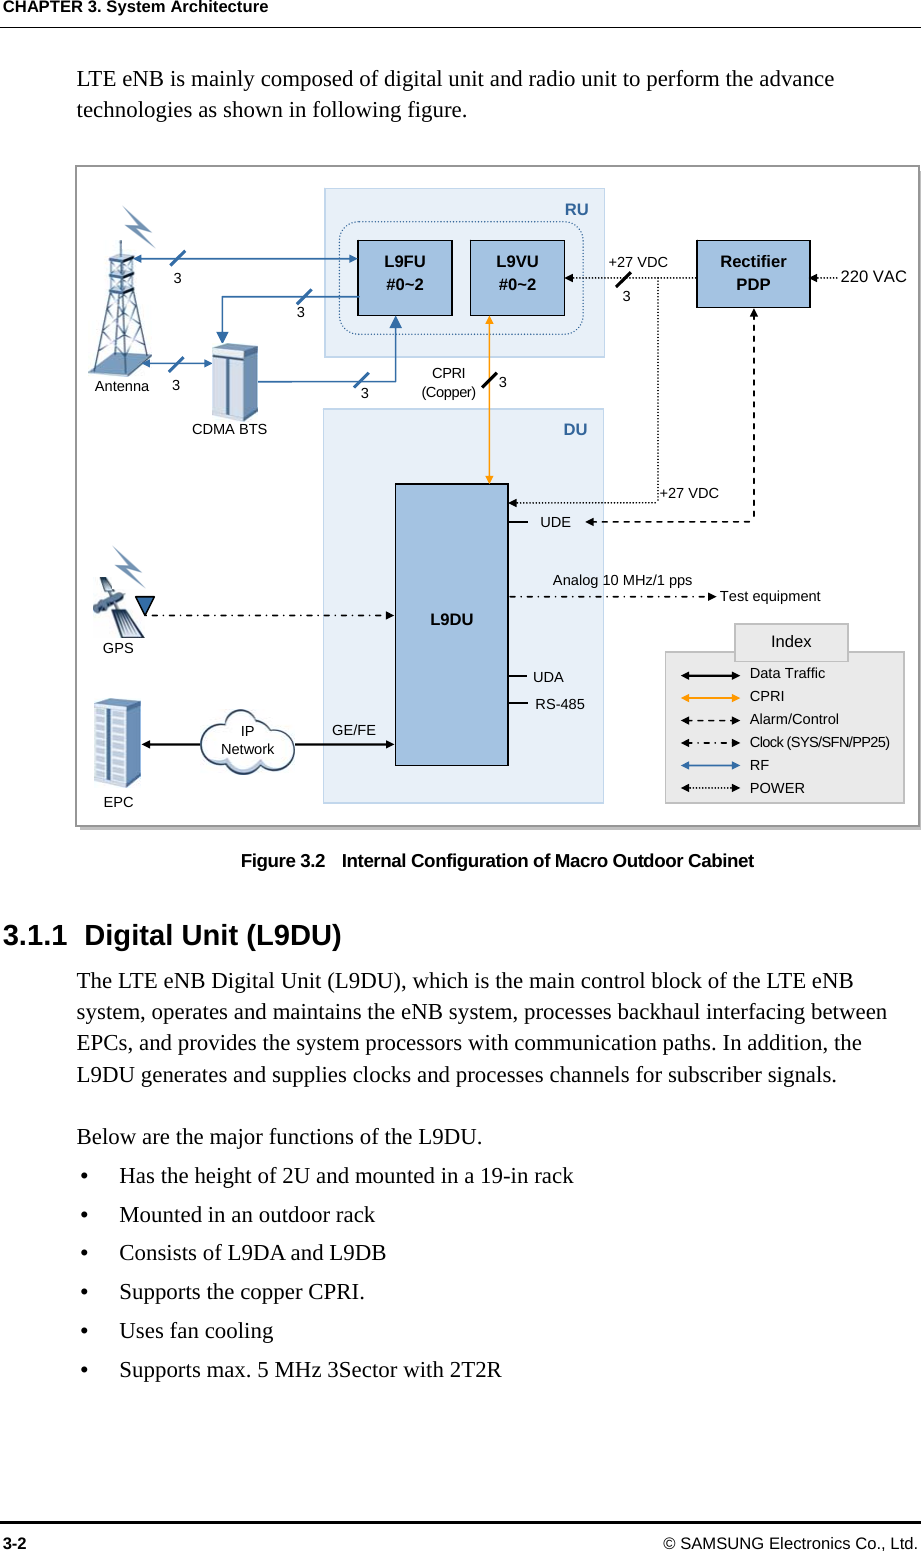 CHAPTER 3. System Architecture 3-2  © SAMSUNG Electronics Co., Ltd. LTE eNB is mainly composed of digital unit and radio unit to perform the advance technologies as shown in following figure.  Figure 3.2    Internal Configuration of Macro Outdoor Cabinet  3.1.1  Digital Unit (L9DU) The LTE eNB Digital Unit (L9DU), which is the main control block of the LTE eNB system, operates and maintains the eNB system, processes backhaul interfacing between EPCs, and provides the system processors with communication paths. In addition, the L9DU generates and supplies clocks and processes channels for subscriber signals.  Below are the major functions of the L9DU. y Has the height of 2U and mounted in a 19-in rack y Mounted in an outdoor rack y Consists of L9DA and L9DB y Supports the copper CPRI. y Uses fan cooling y Supports max. 5 MHz 3Sector with 2T2R  RU L9FU #0~2 L9VU #0~2 DUL9DU 3 3 3  3 CPRI (Copper) 3 +27 VDC +27 VDC 220 VAC Rectifier PDP 3 UDE UDA RS-485GE/FE Analog 10 MHz/1 pps  Test equipment GPS EPC Antenna Data Traffic CPRI Alarm/Control Clock (SYS/SFN/PP25)RF POWER Index IP Network CDMA BTS 